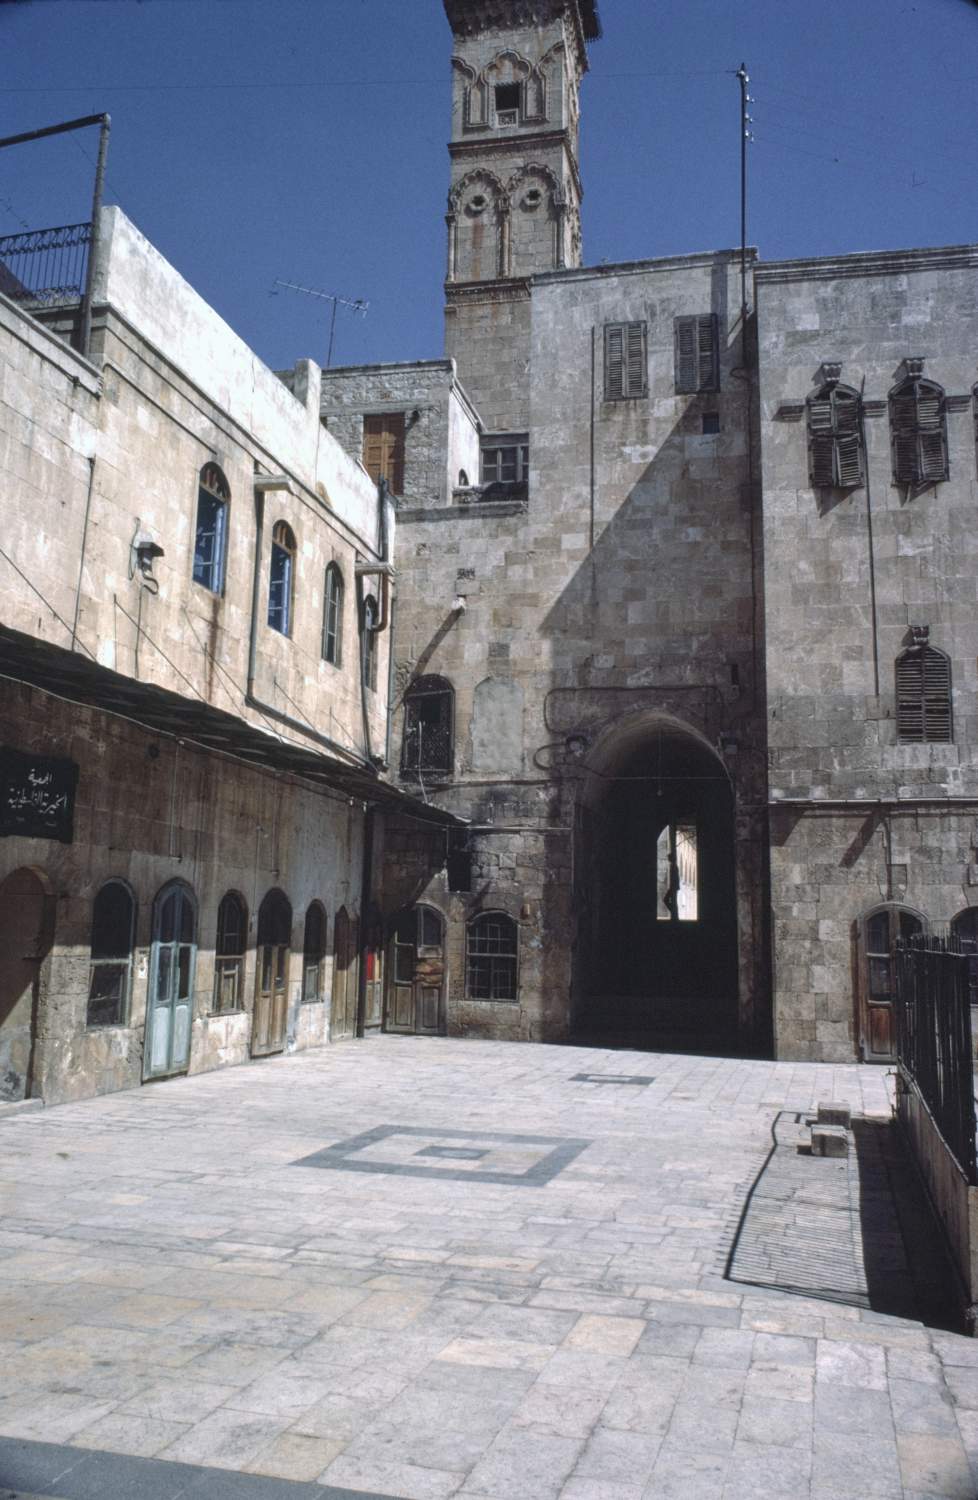 View of courtyard facing east showing archway of hall behind entrance portal in northeastern corner. Minaret of Umayyad Mosque visible in background.